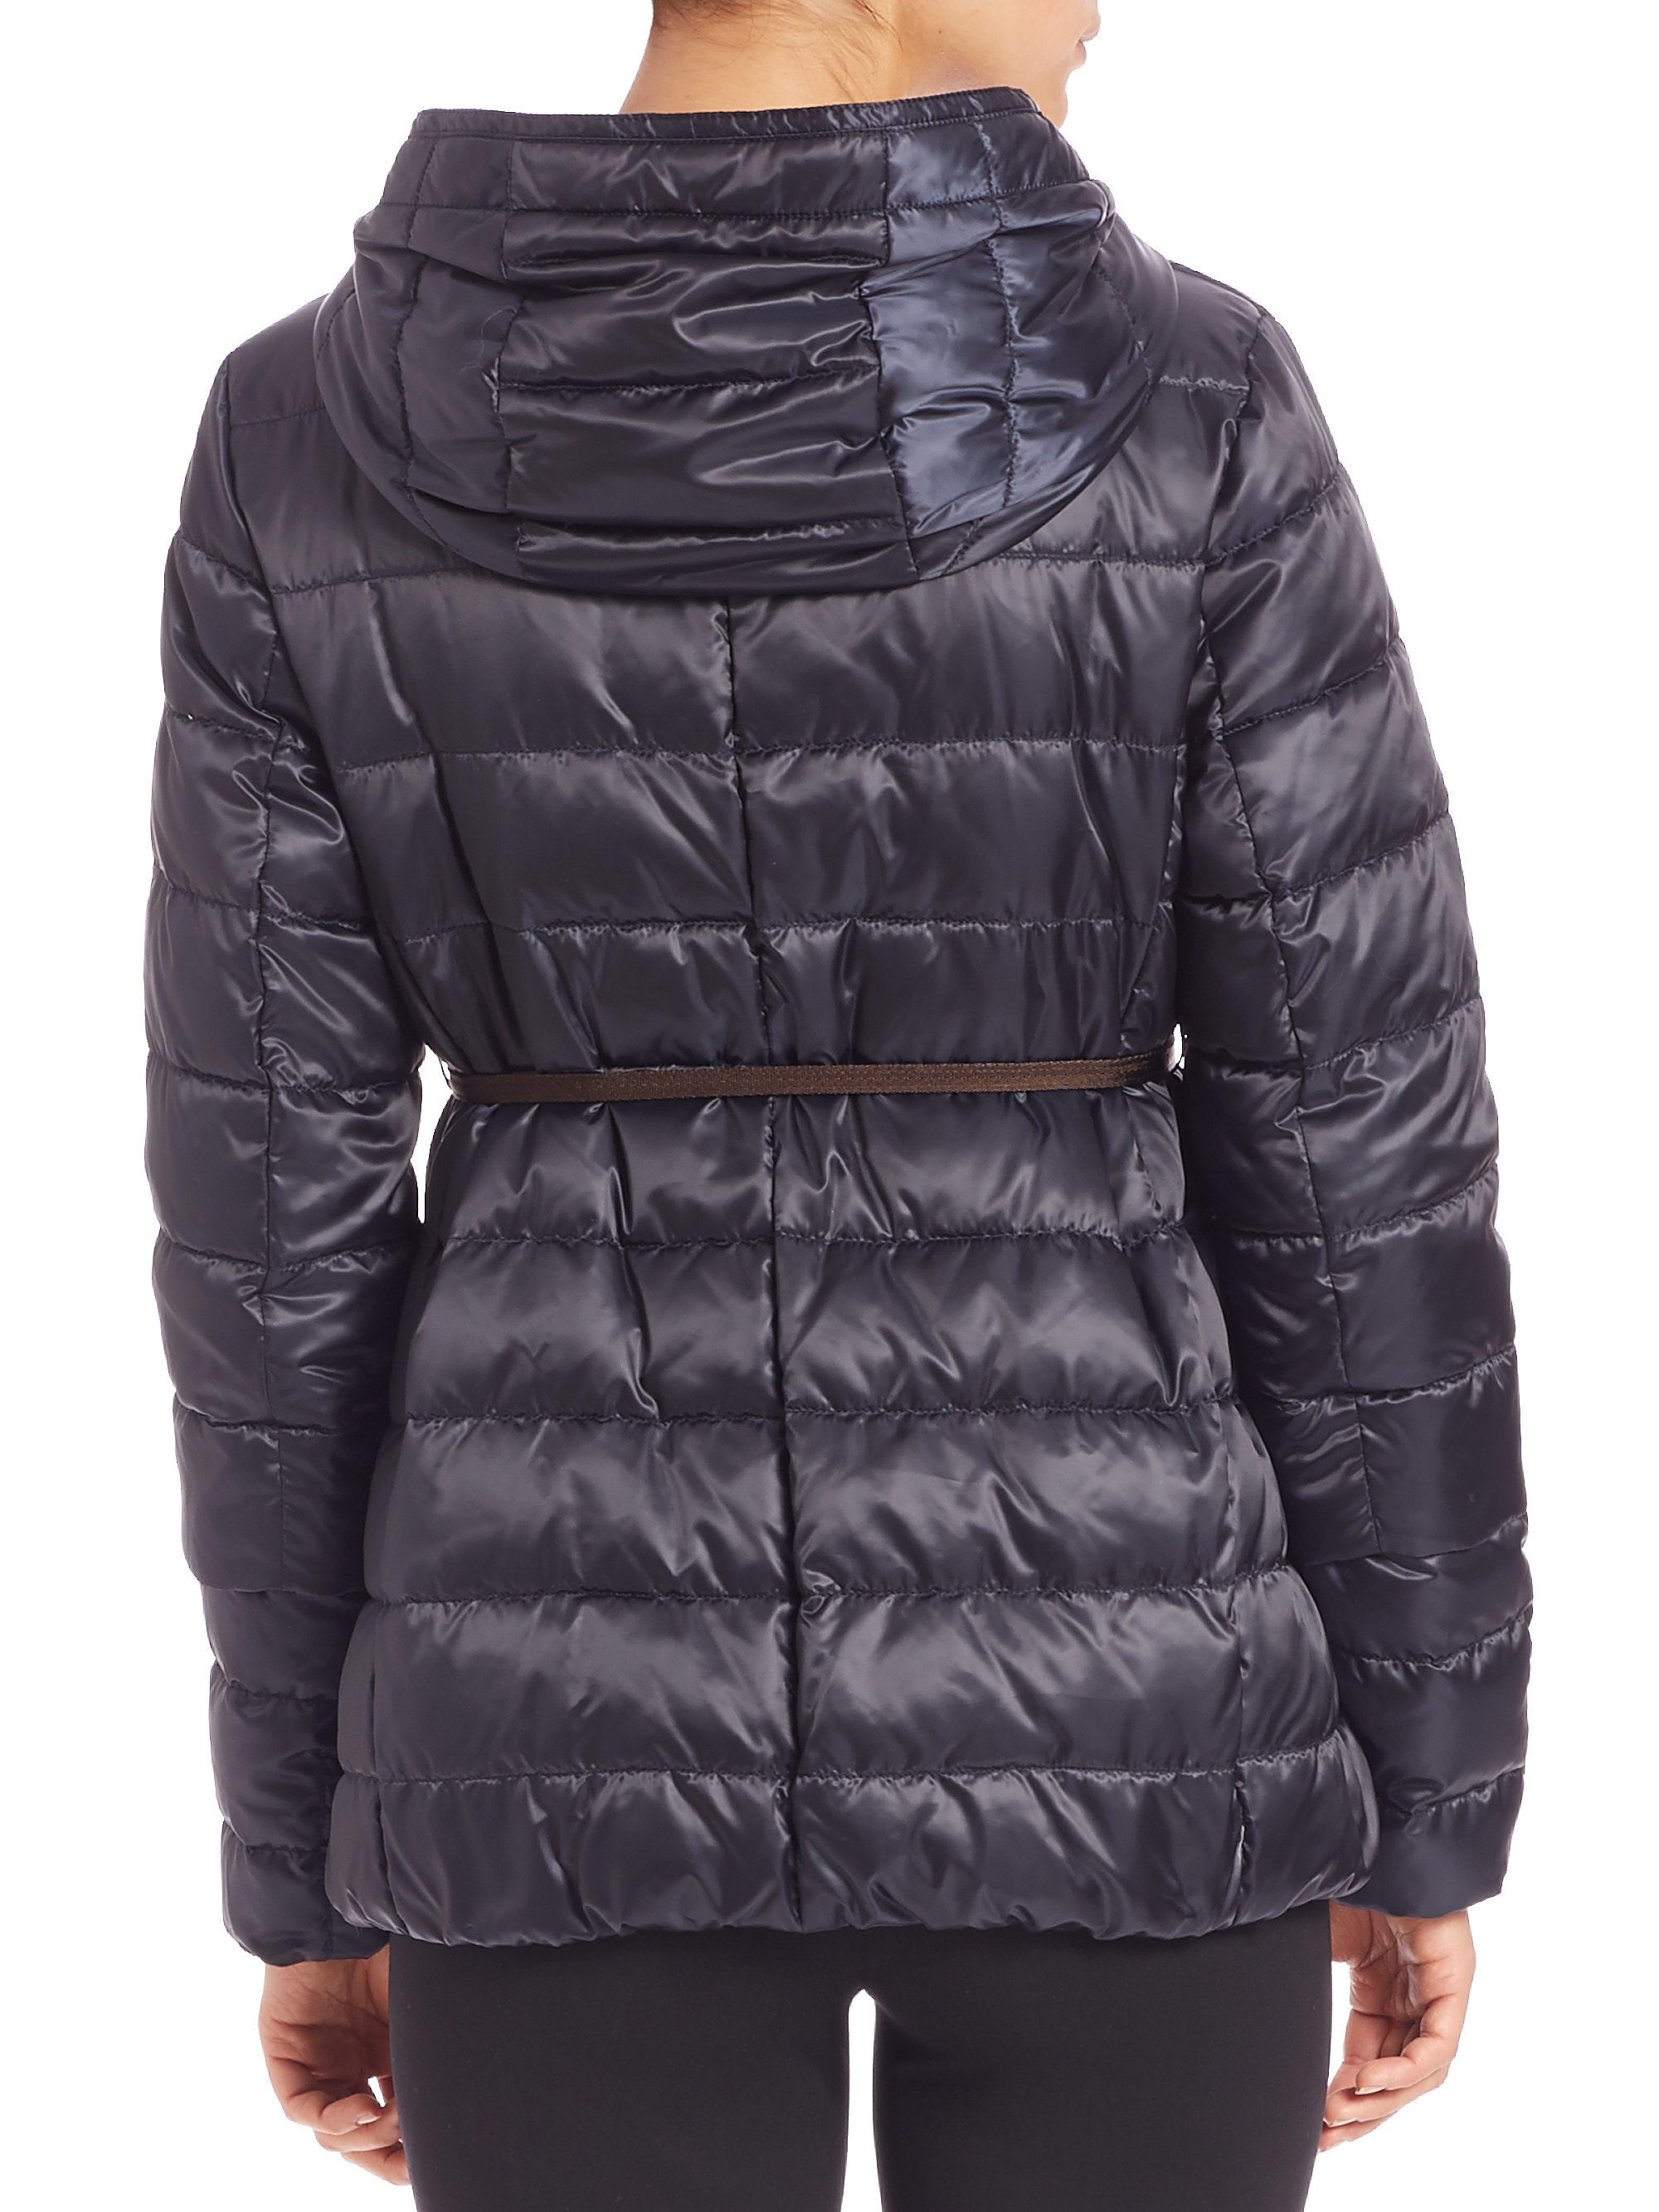 Lyst - Max Mara Cube Collection Reversible Puffer Coat in Blue